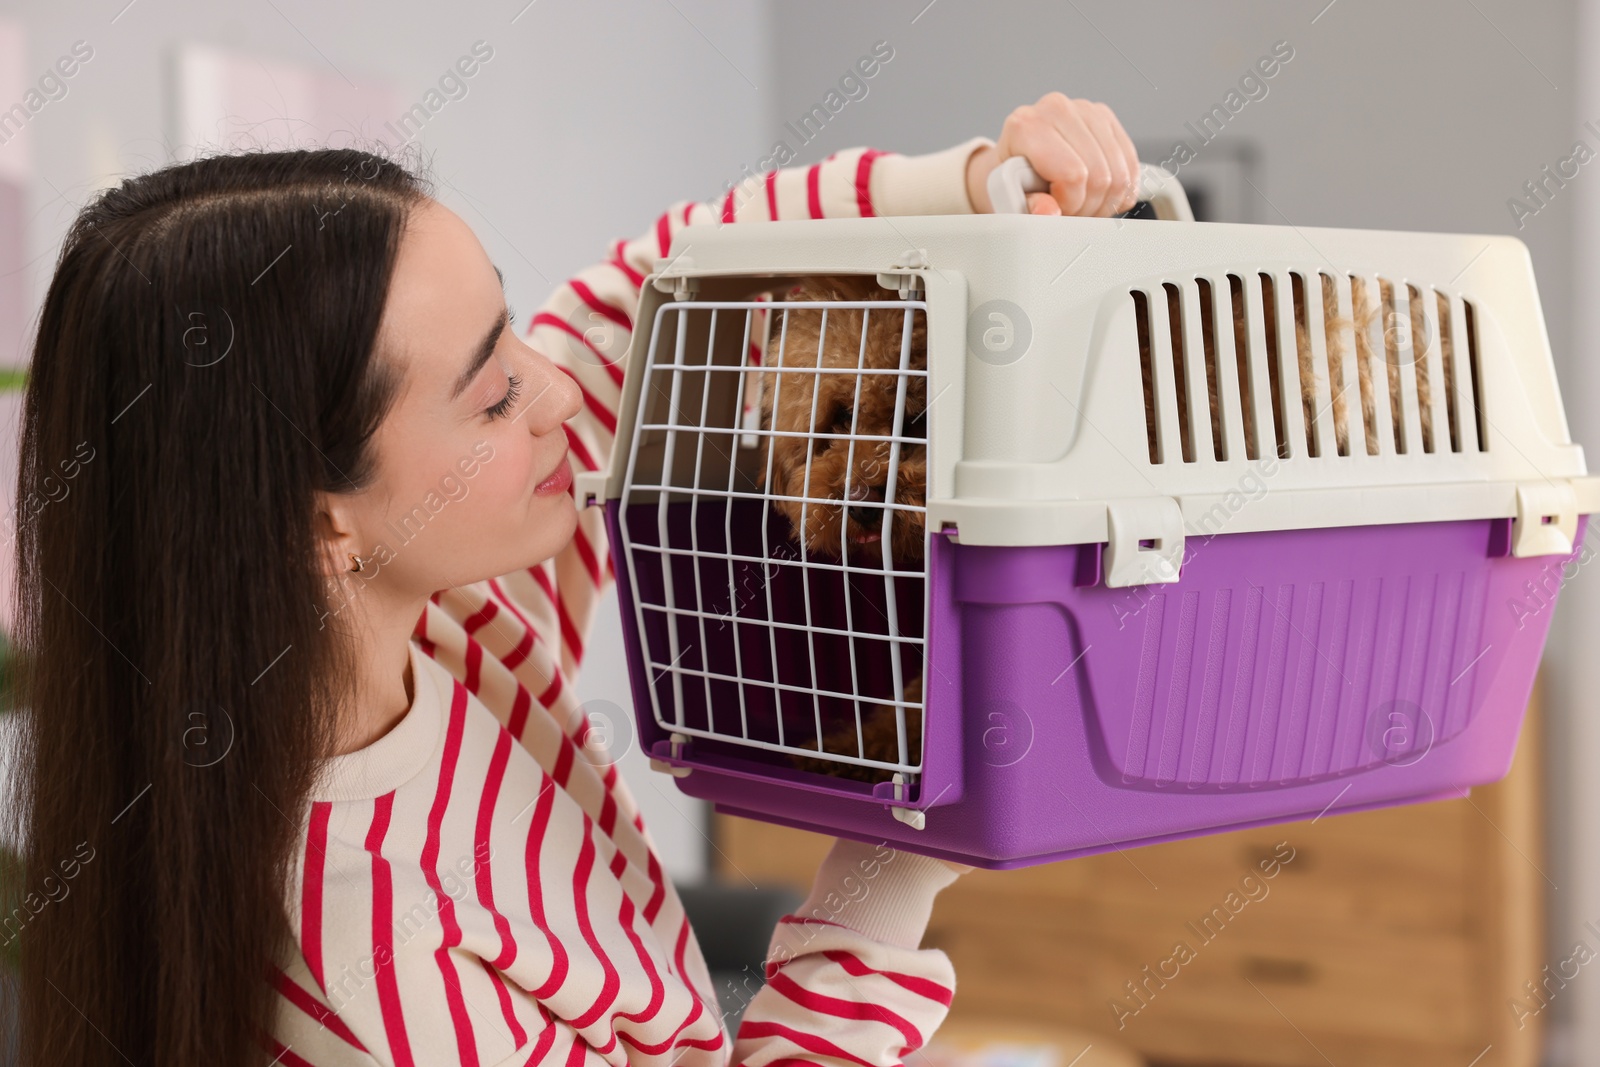 Photo of Travelling with pet. Woman looking at carrier with her dog indoors